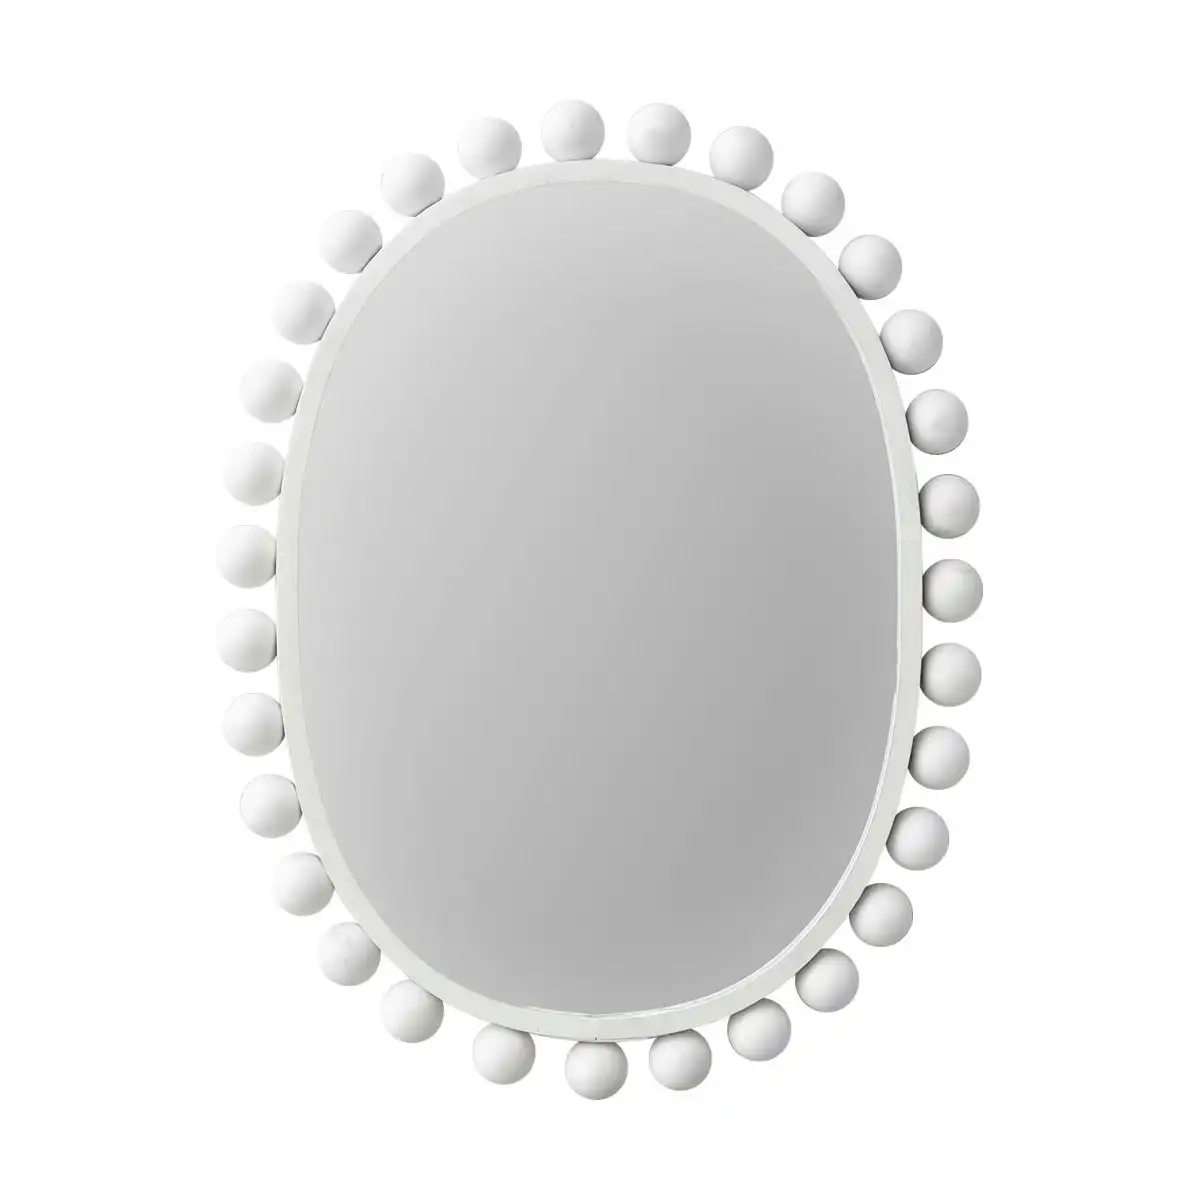 SSH Collection Beaded Edge Oval Wall Mirror - White